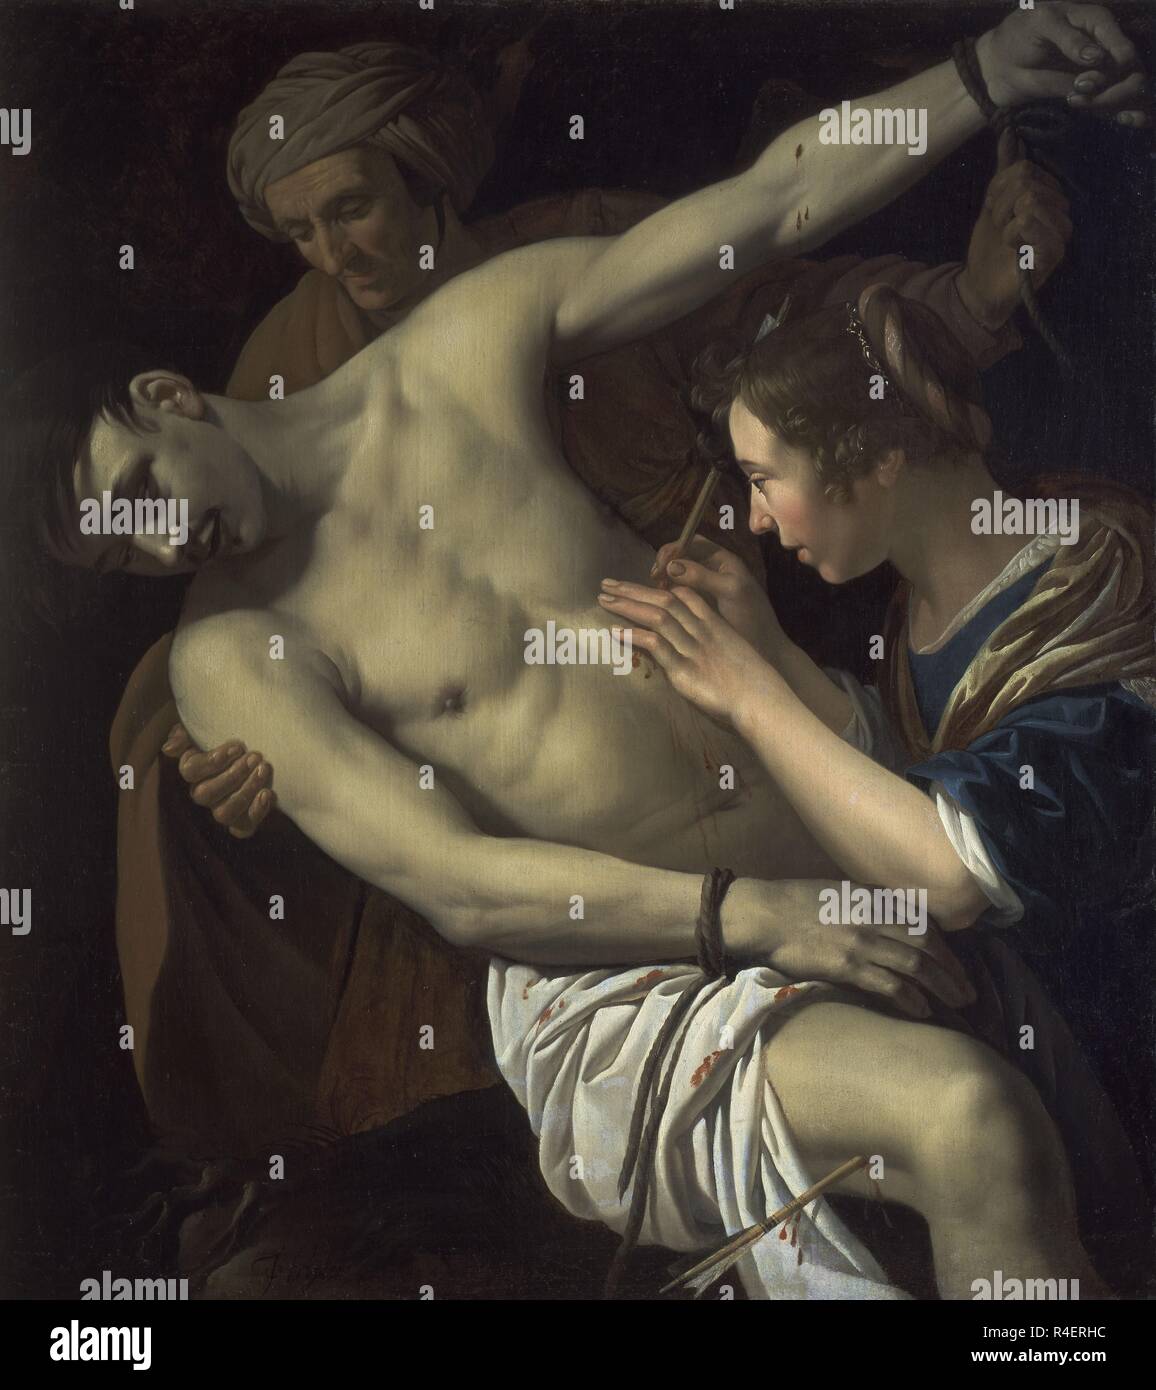 St. Sebastian and St. Irene - 1624 - 113x100 cm - oil on canvas - Dusch Baroque. Author: BYLERT, JAN VAN. Location: PRIVATE COLLECTION. Stock Photo